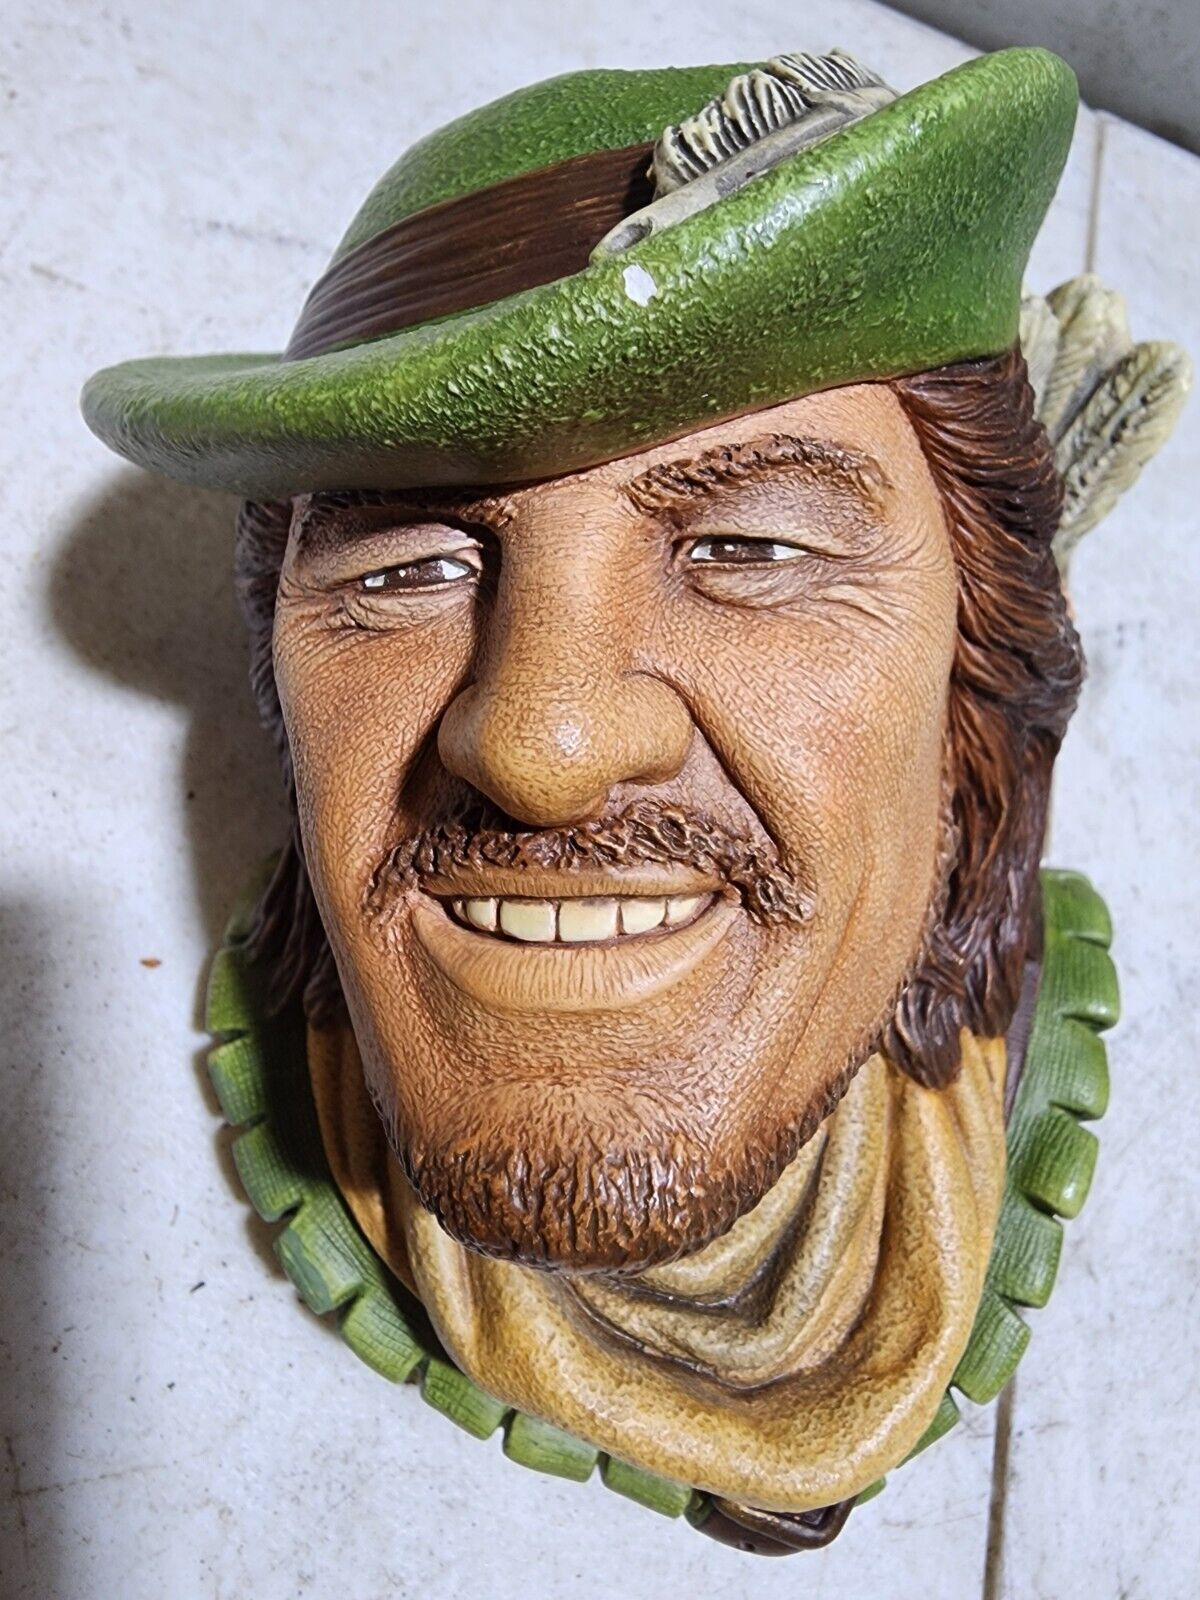 Bossons Robin Hood Chalkware 1985 Legend Products Wall Hanging- 6 Inches 